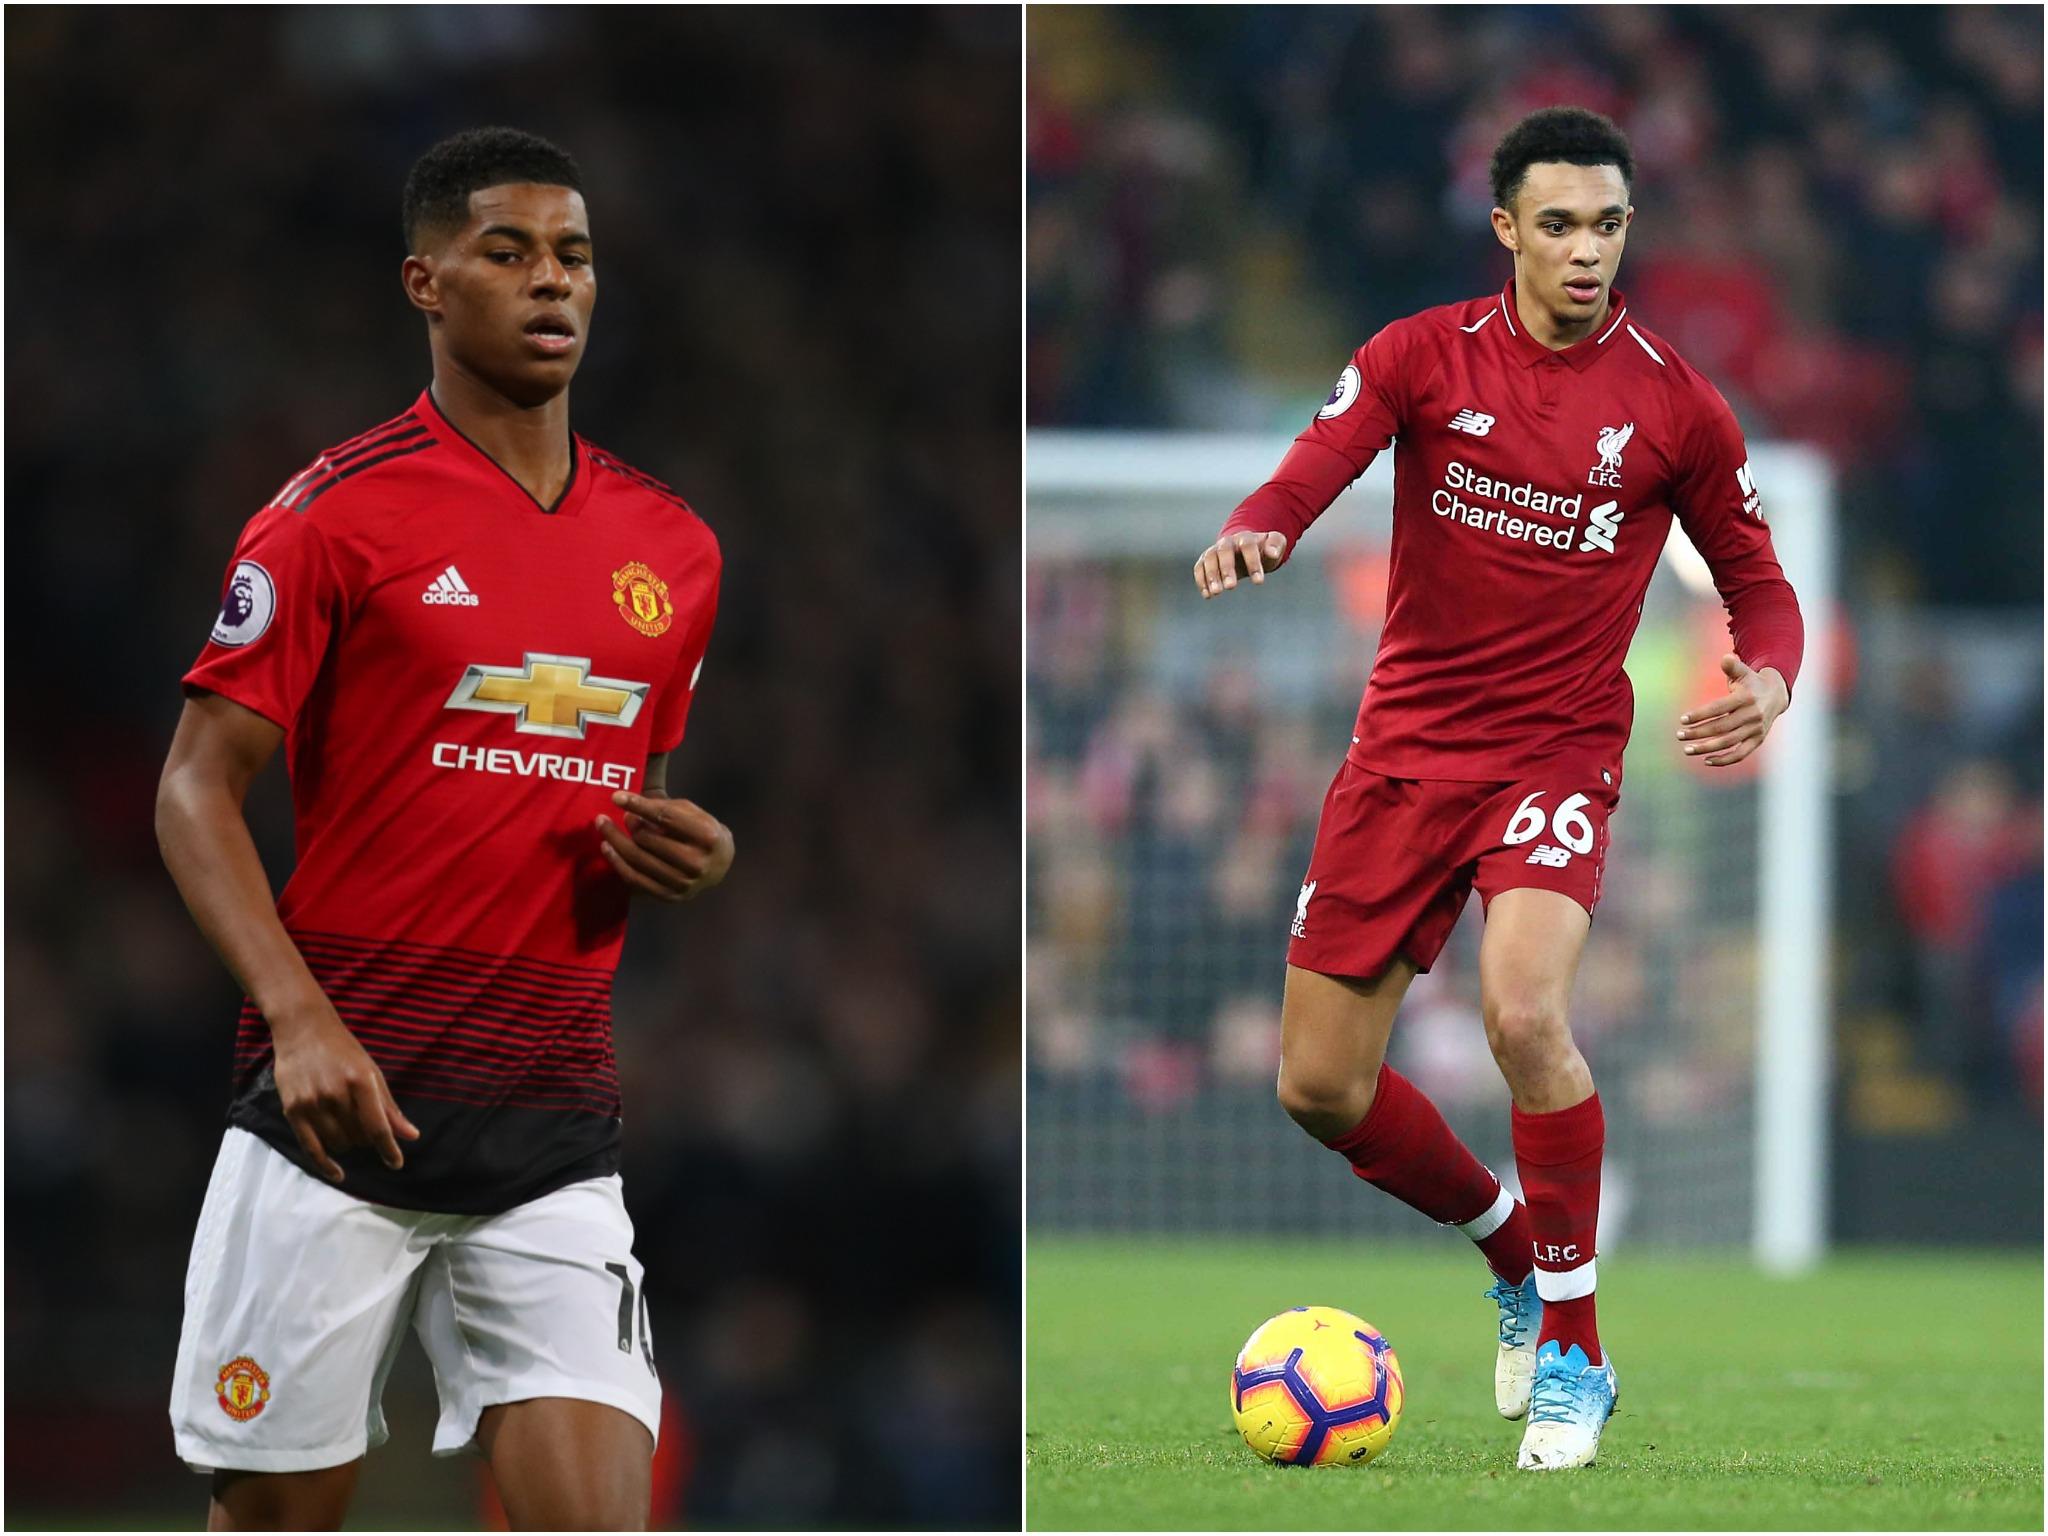 The brothers of Marcus Rashford and Trent Alexander-Arnold were robbed in a Manchester cafe